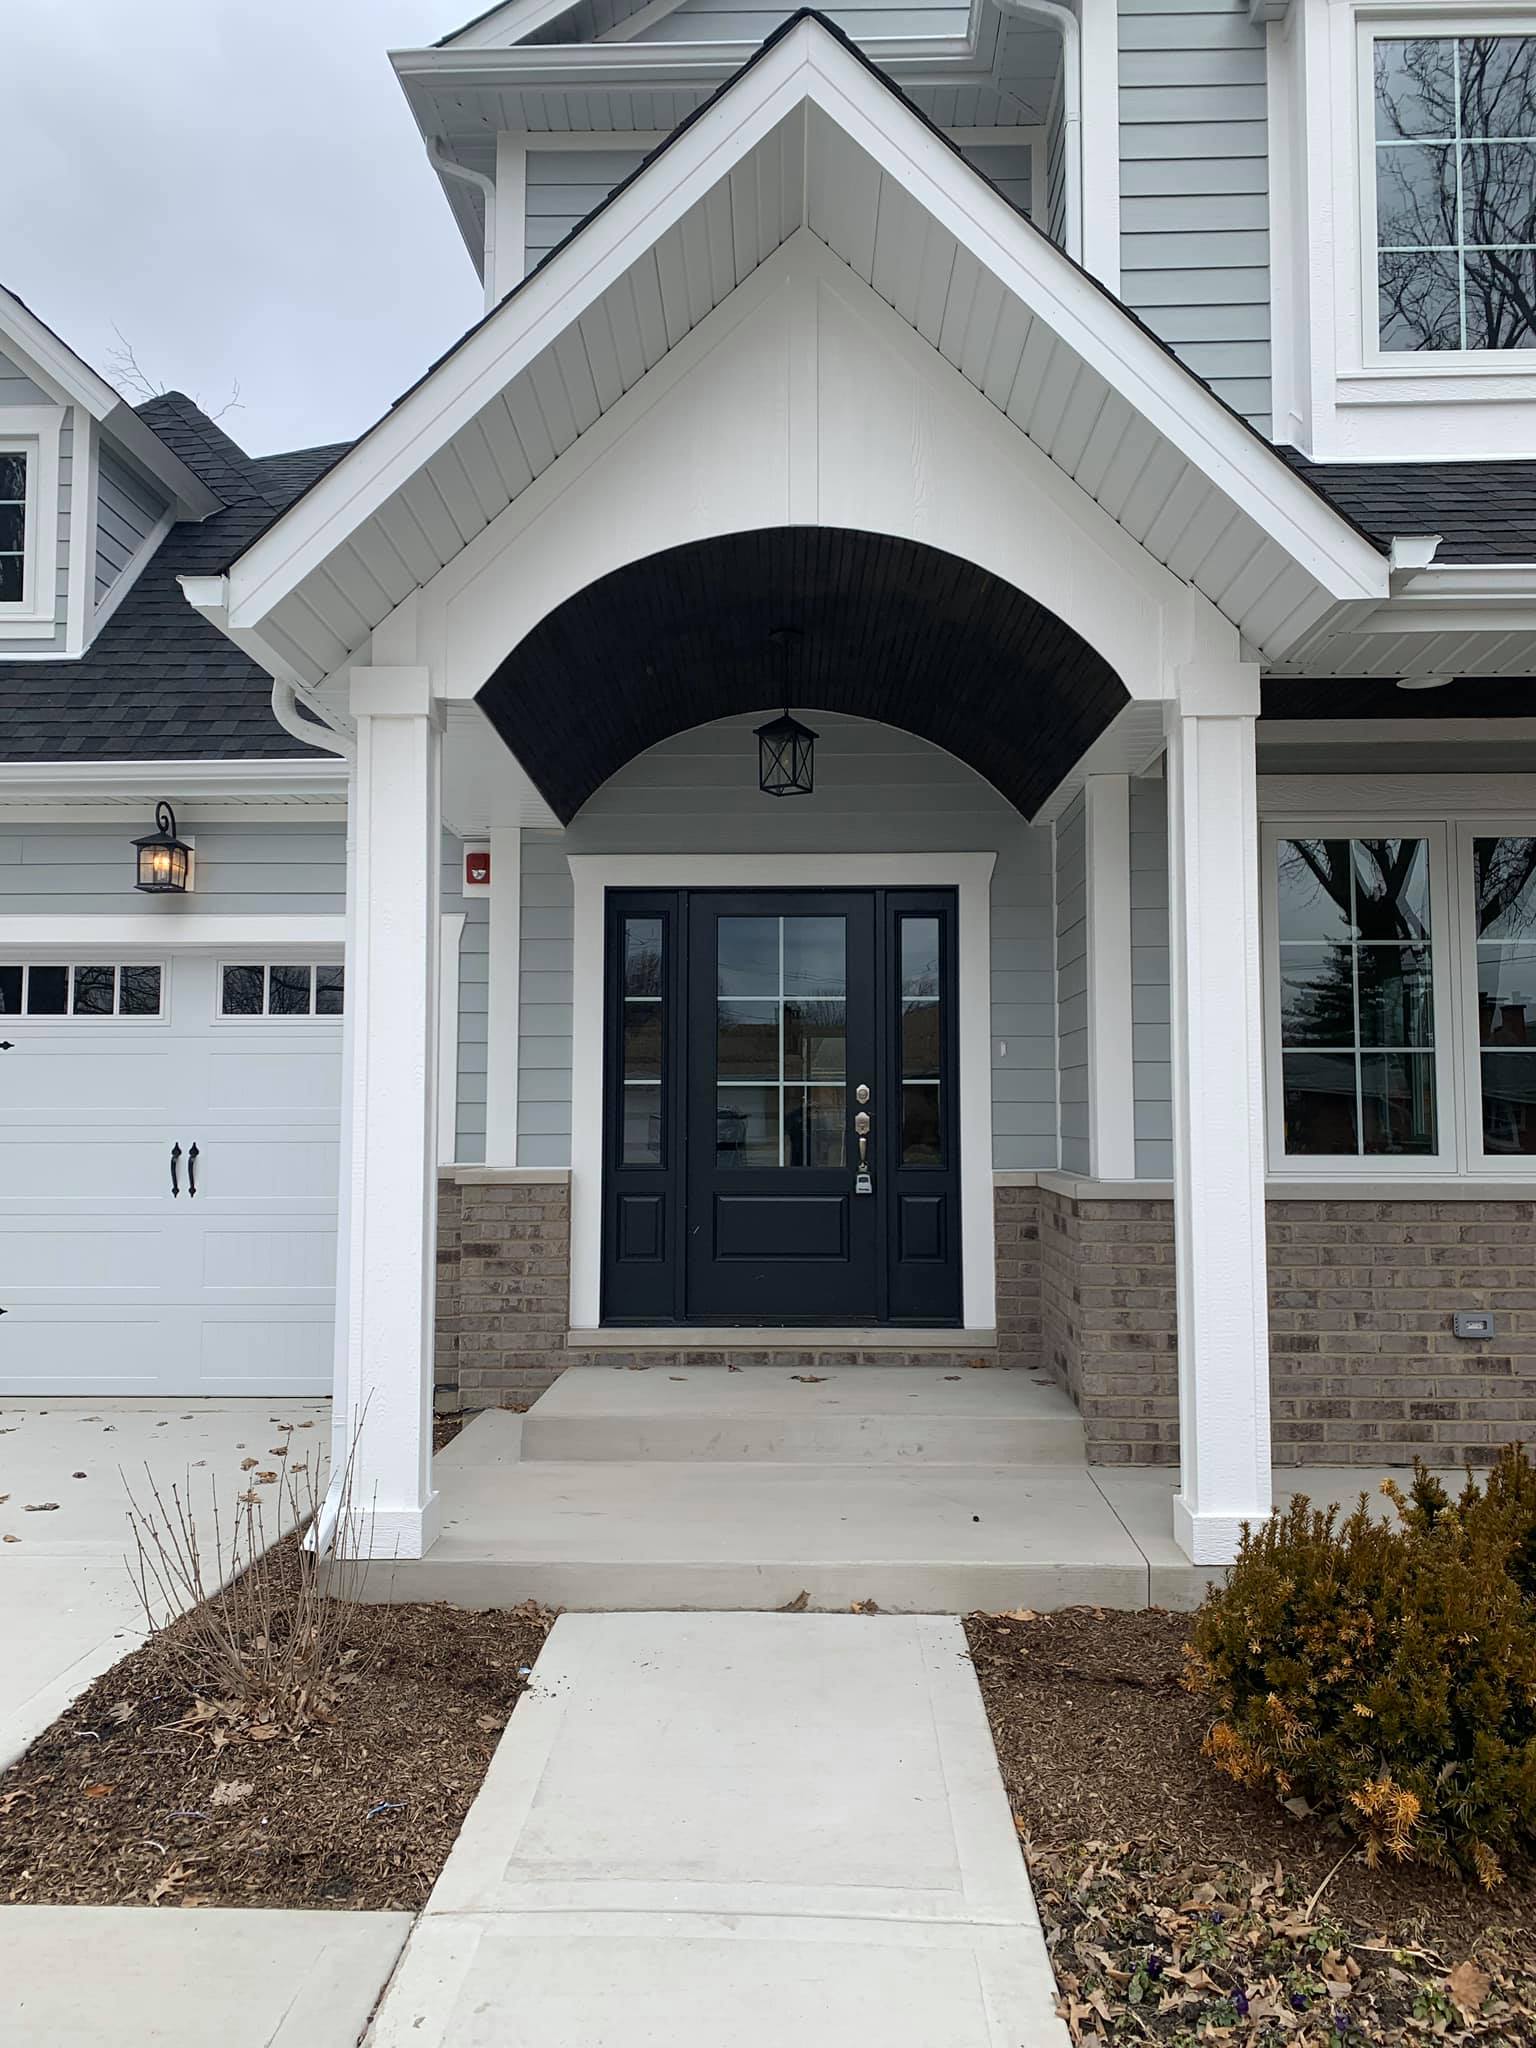 Expert installation services for exterior doors and trims in the Chicago area, enhancing the exterior of homes with precise craftsmanship.